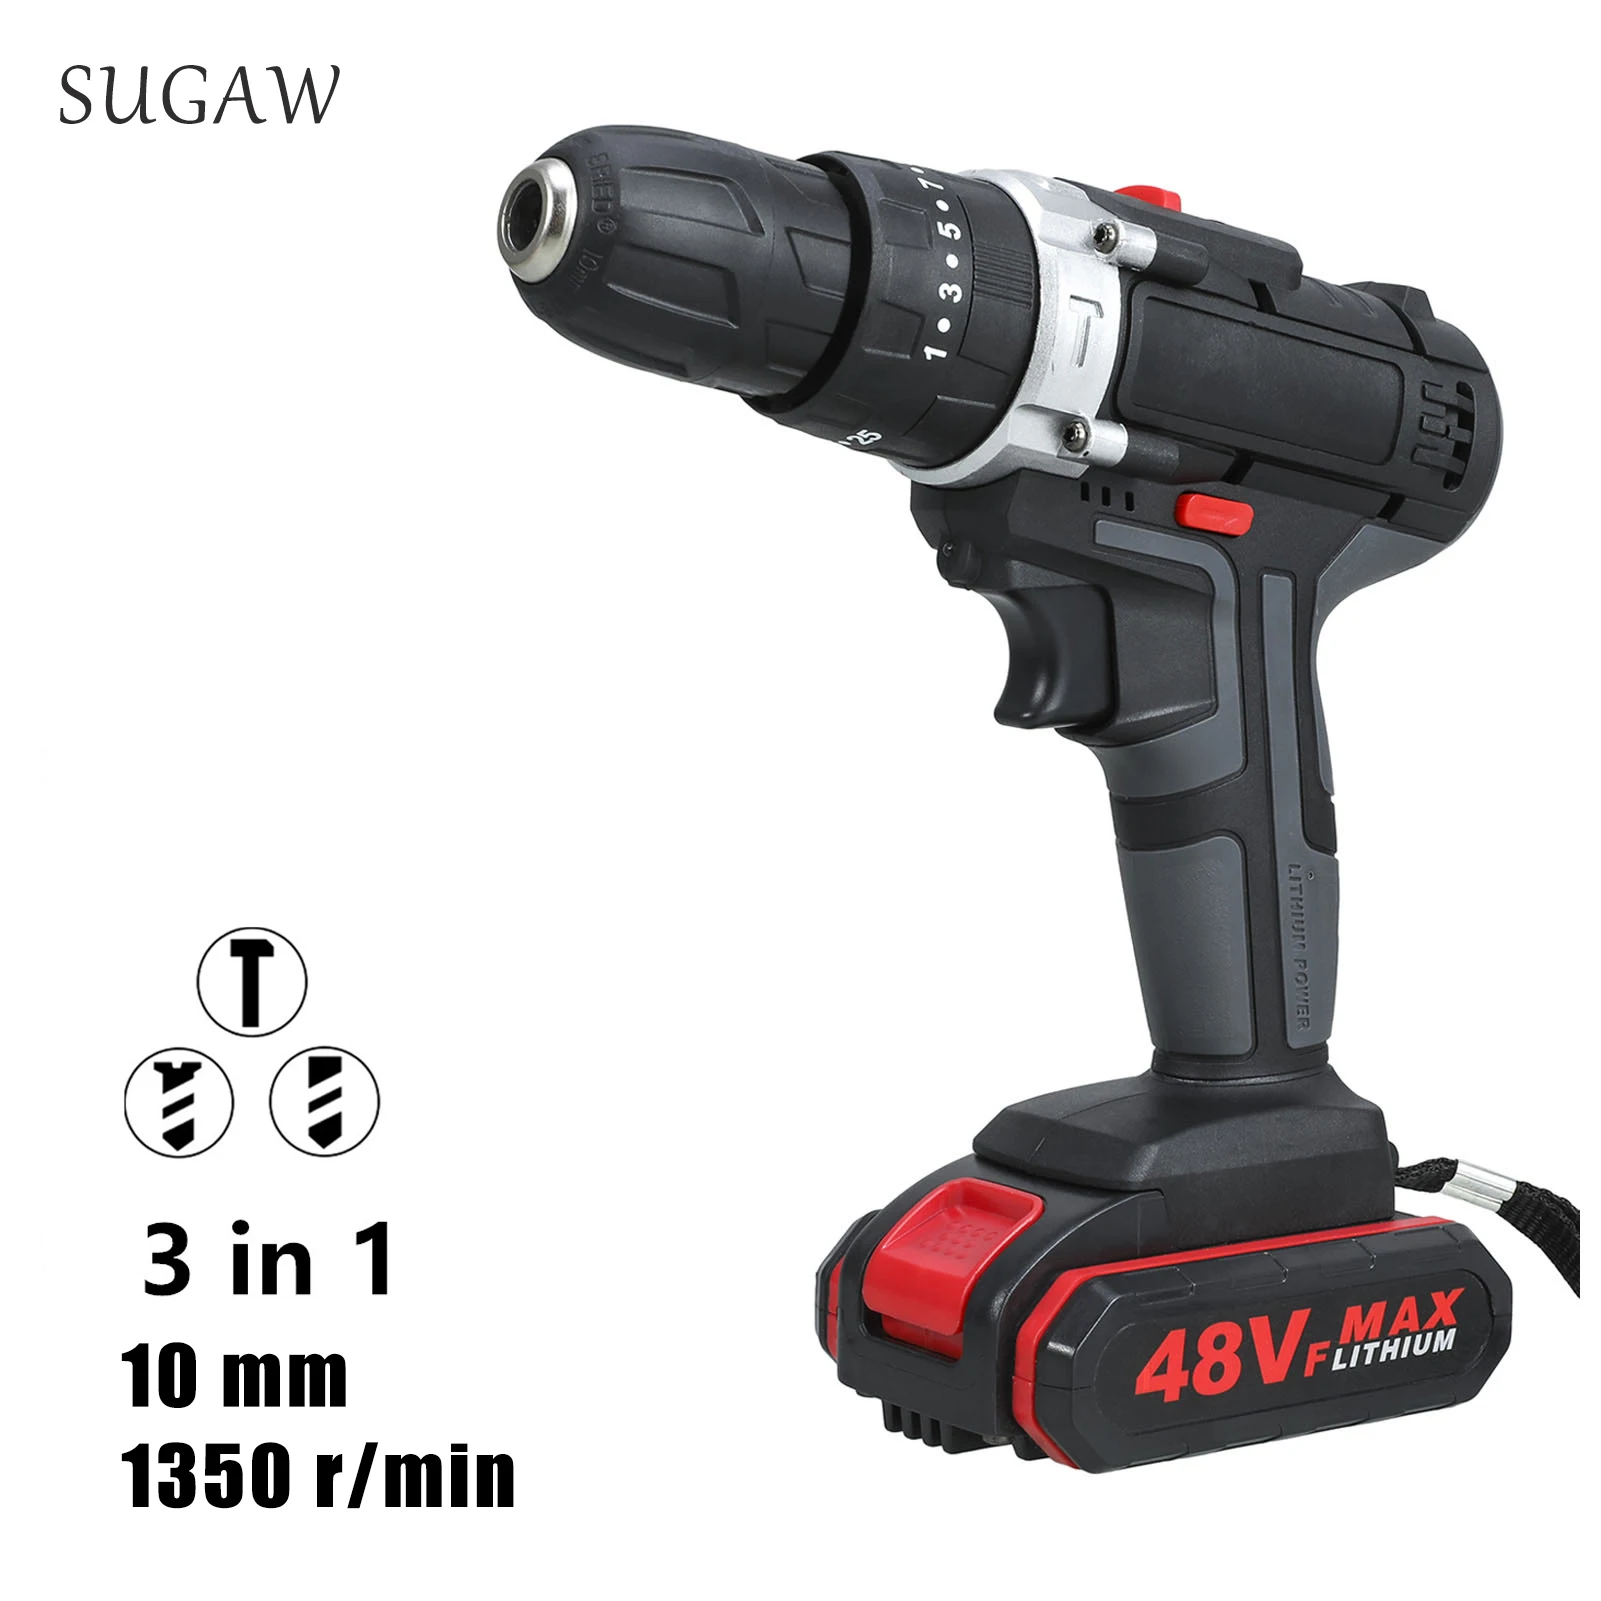 SUGAW 48V Electric Drill Cordless Impact Brushless Battery Drill Charging Electric Screwdriver Hand Tools